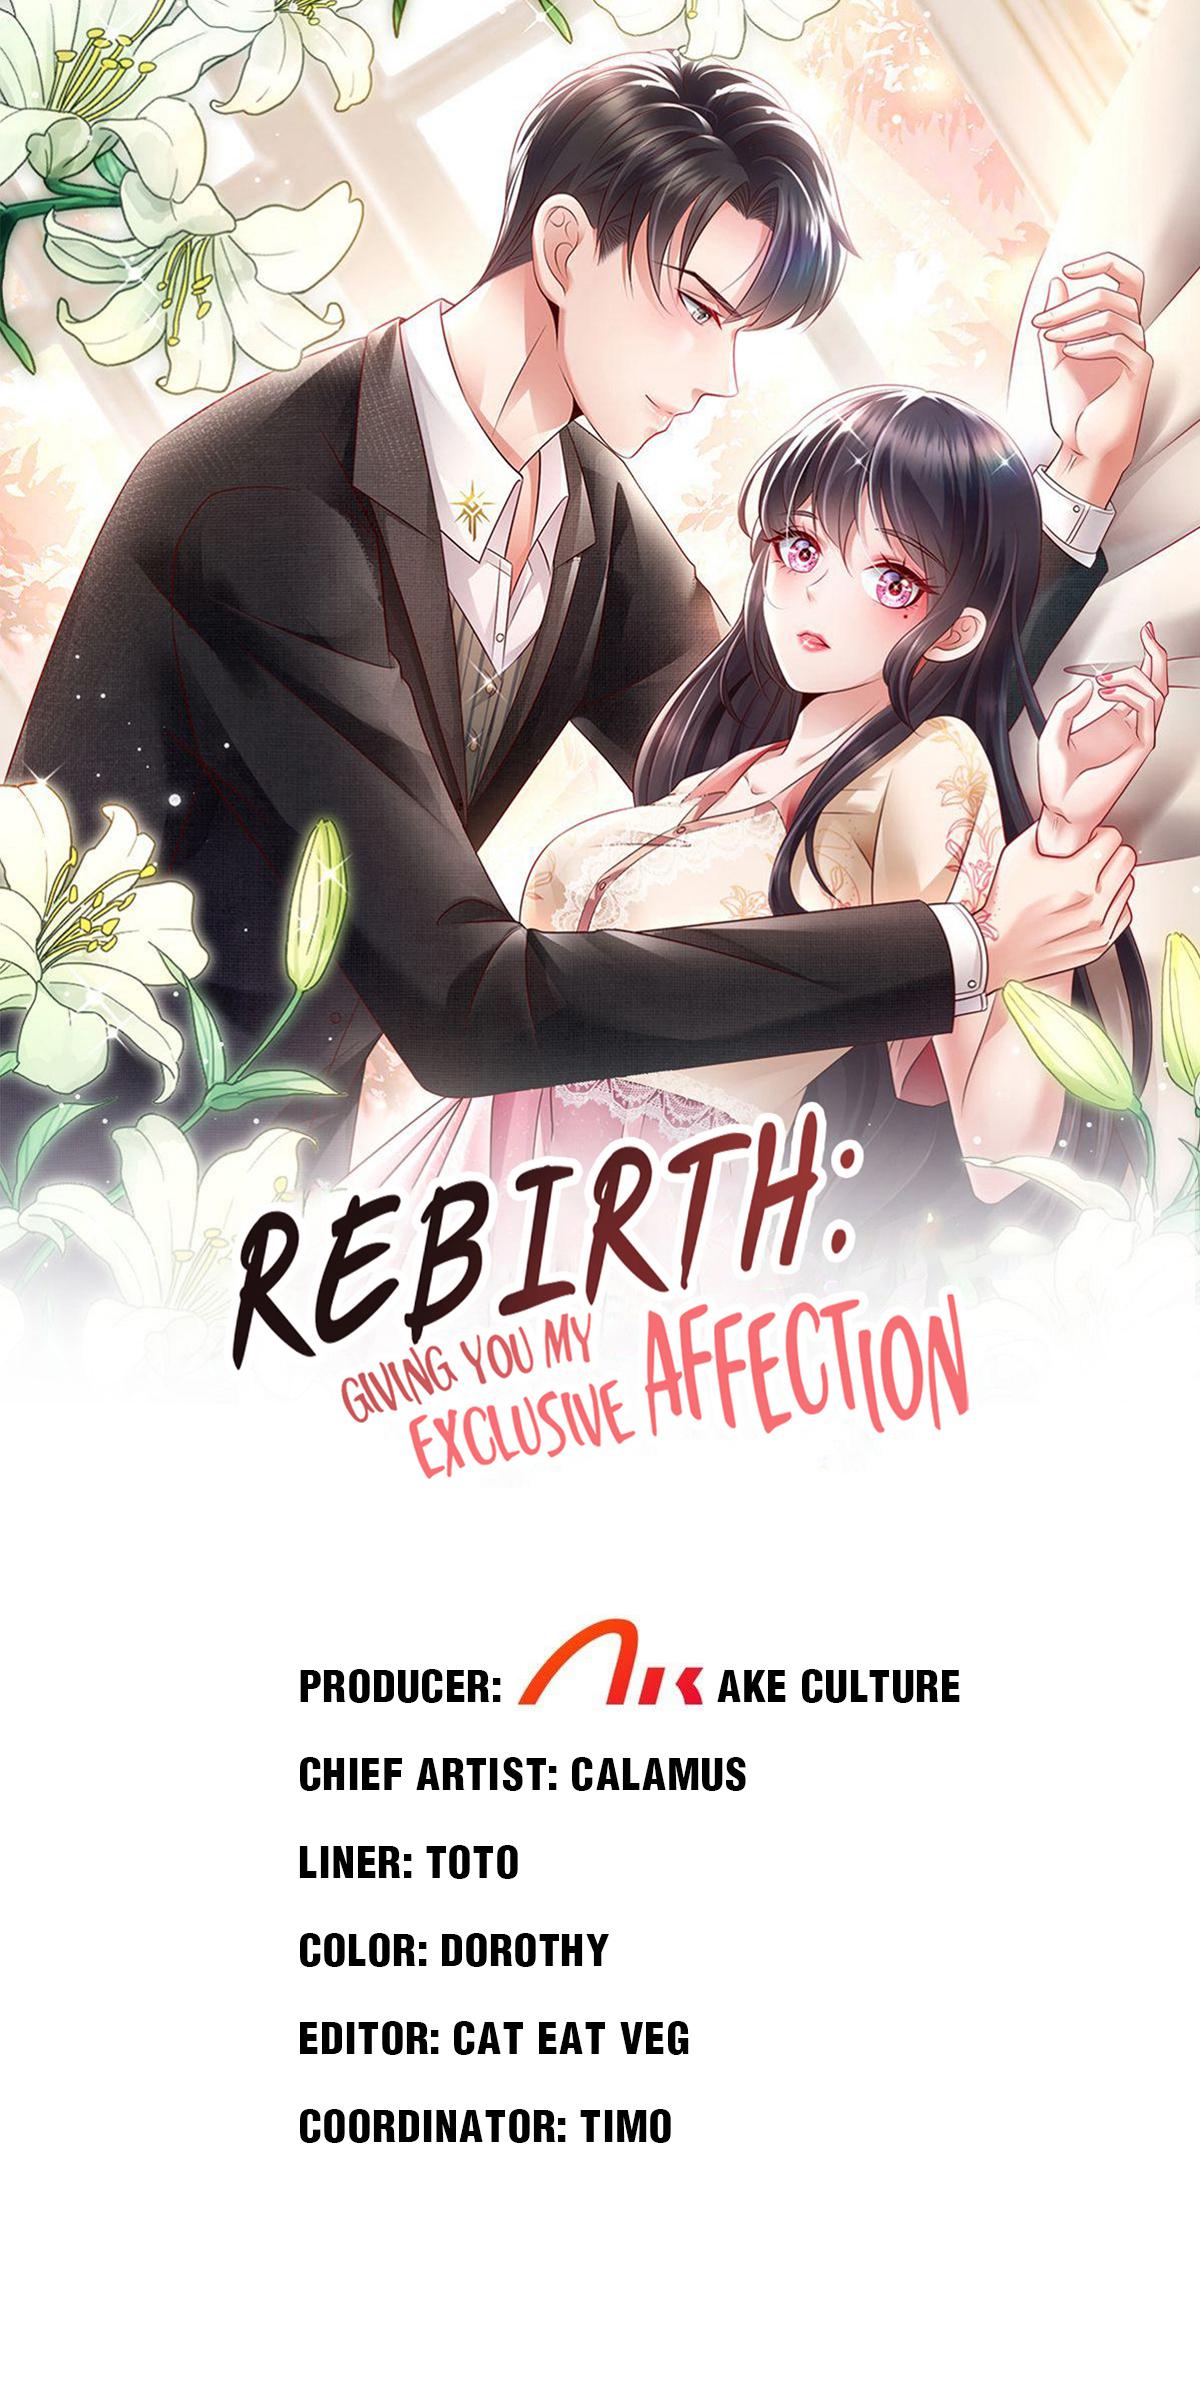 Rebirth: Giving You My Exclusive Affection 167